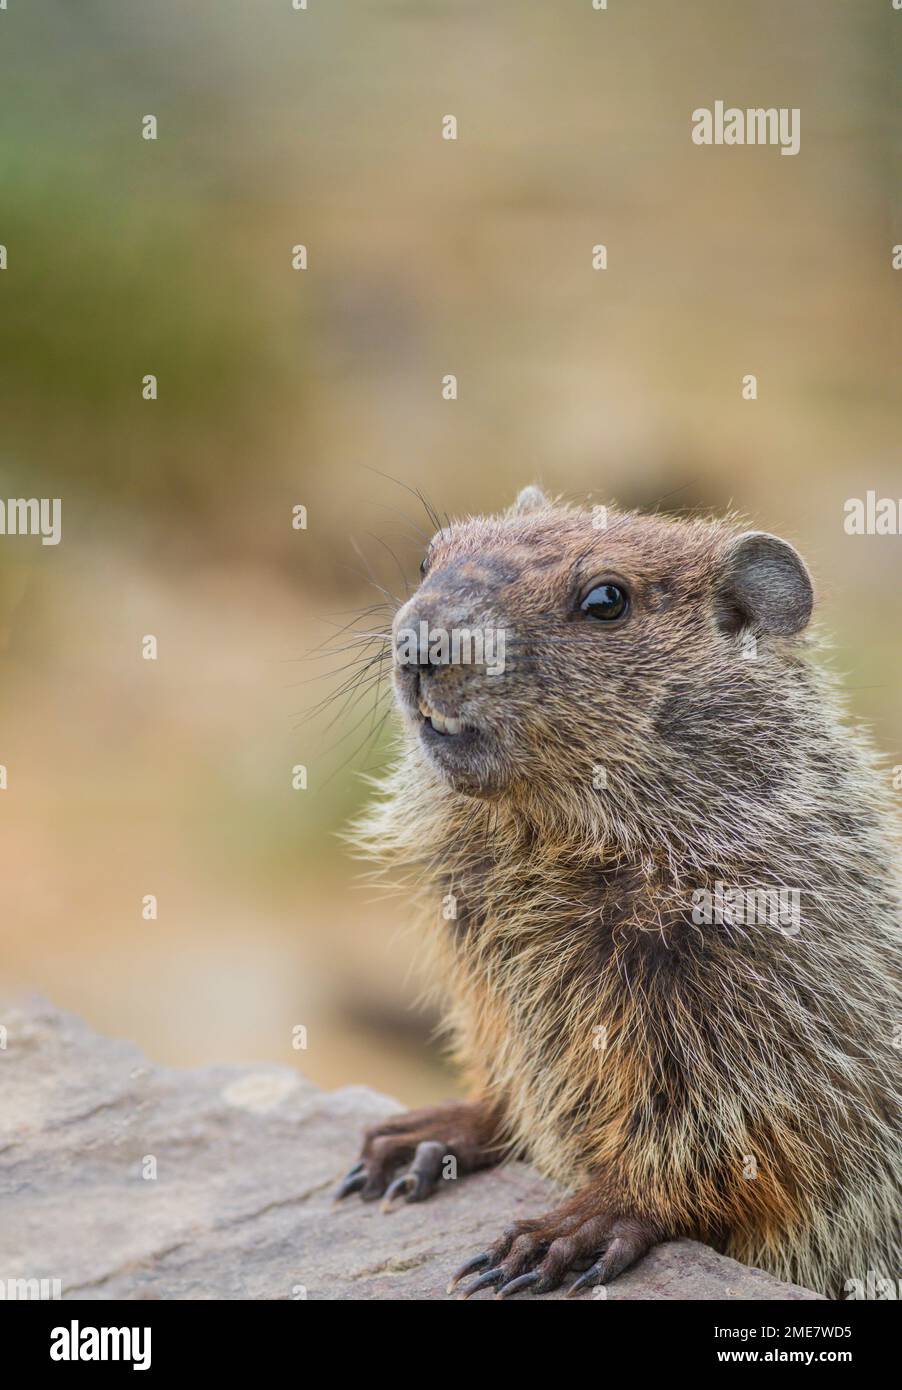 Cute young groundhog closeup great for Happy Groundhog Day and Spring with copy space Stock Photo